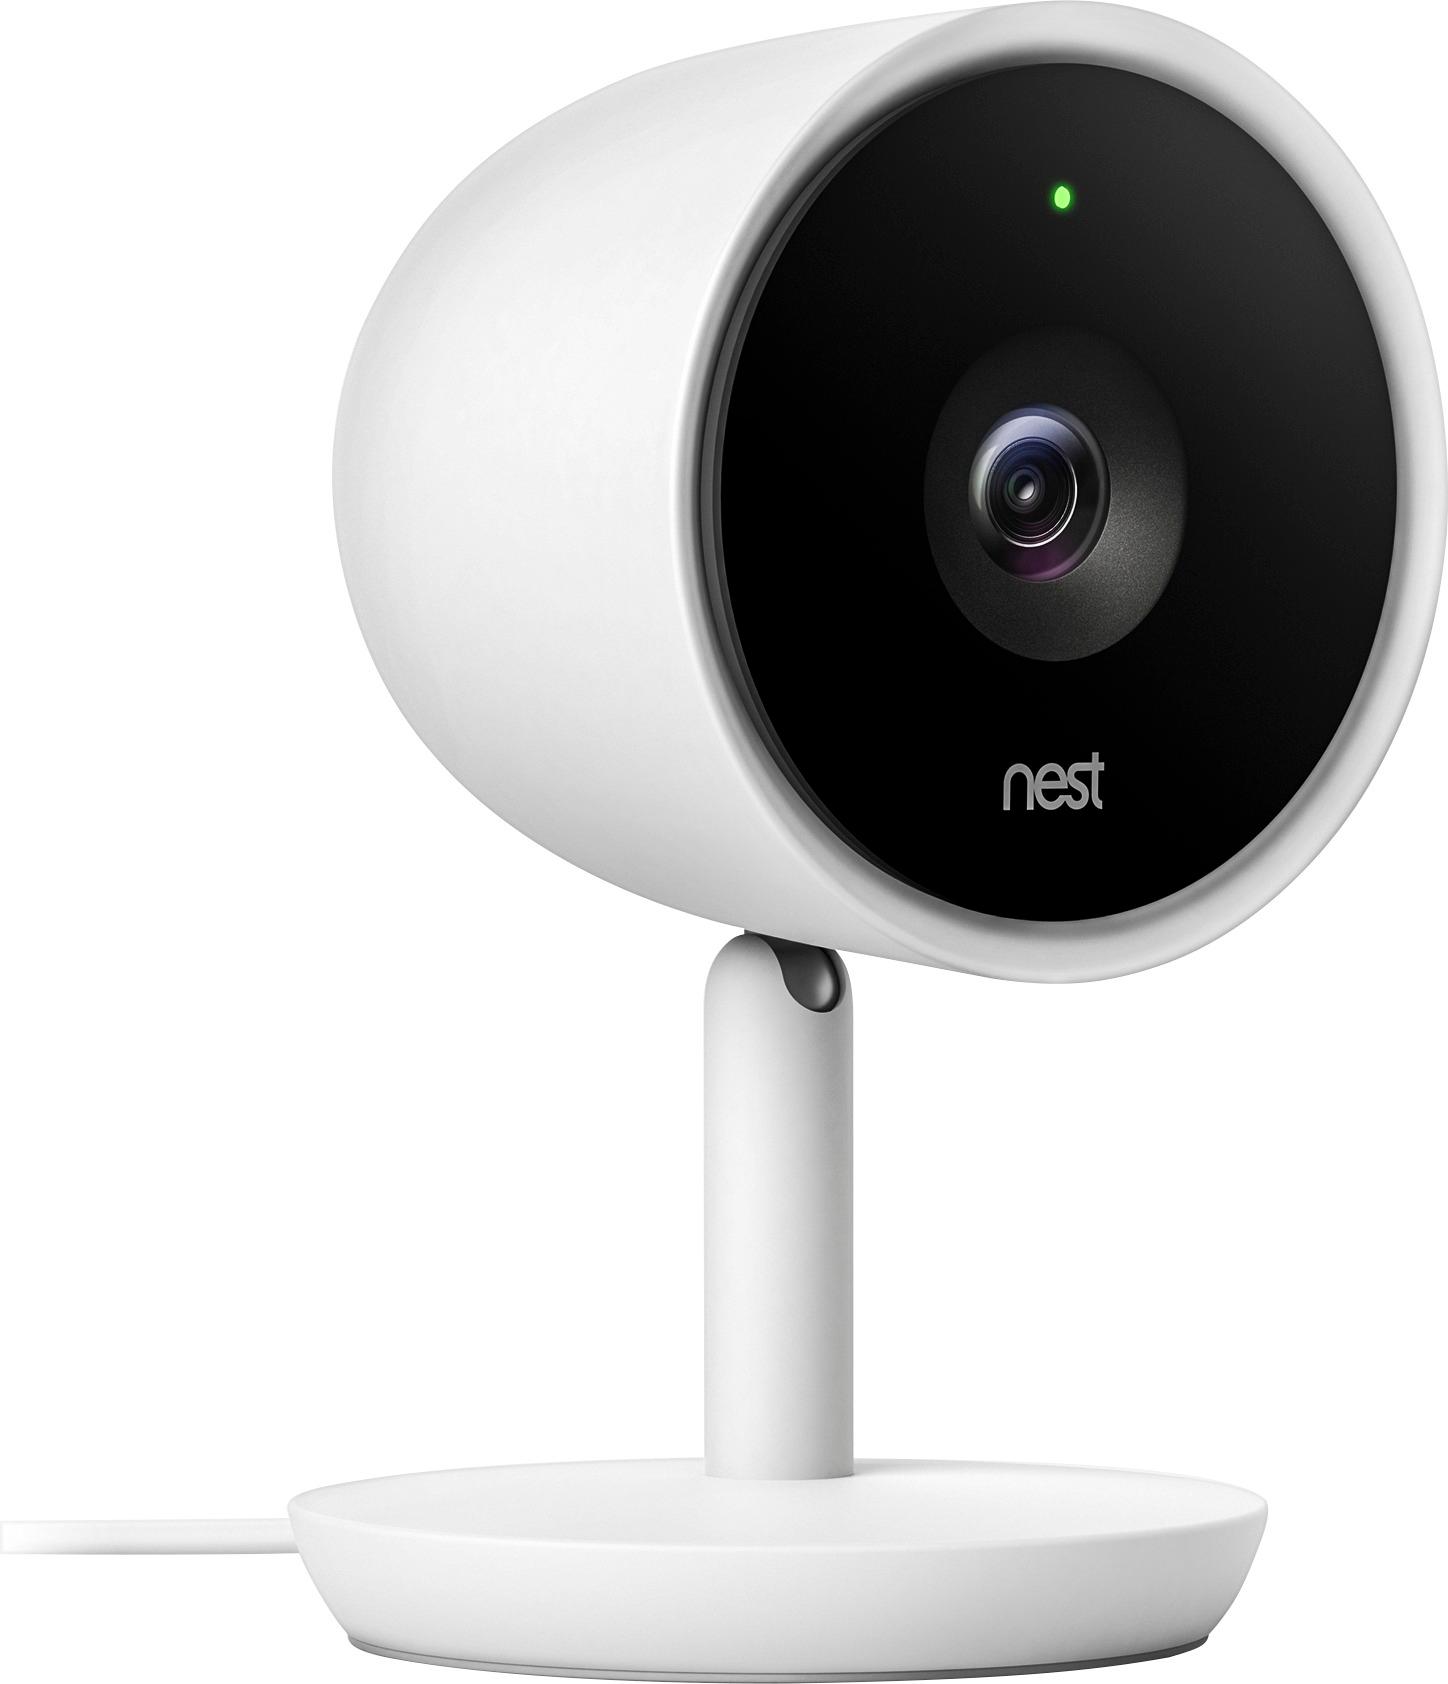 Google - Nest Cam IQ Indoor Full HD Wi-Fi Home Security Camera (2-Pack) - White was $498.99 now $348.99 (30.0% off)